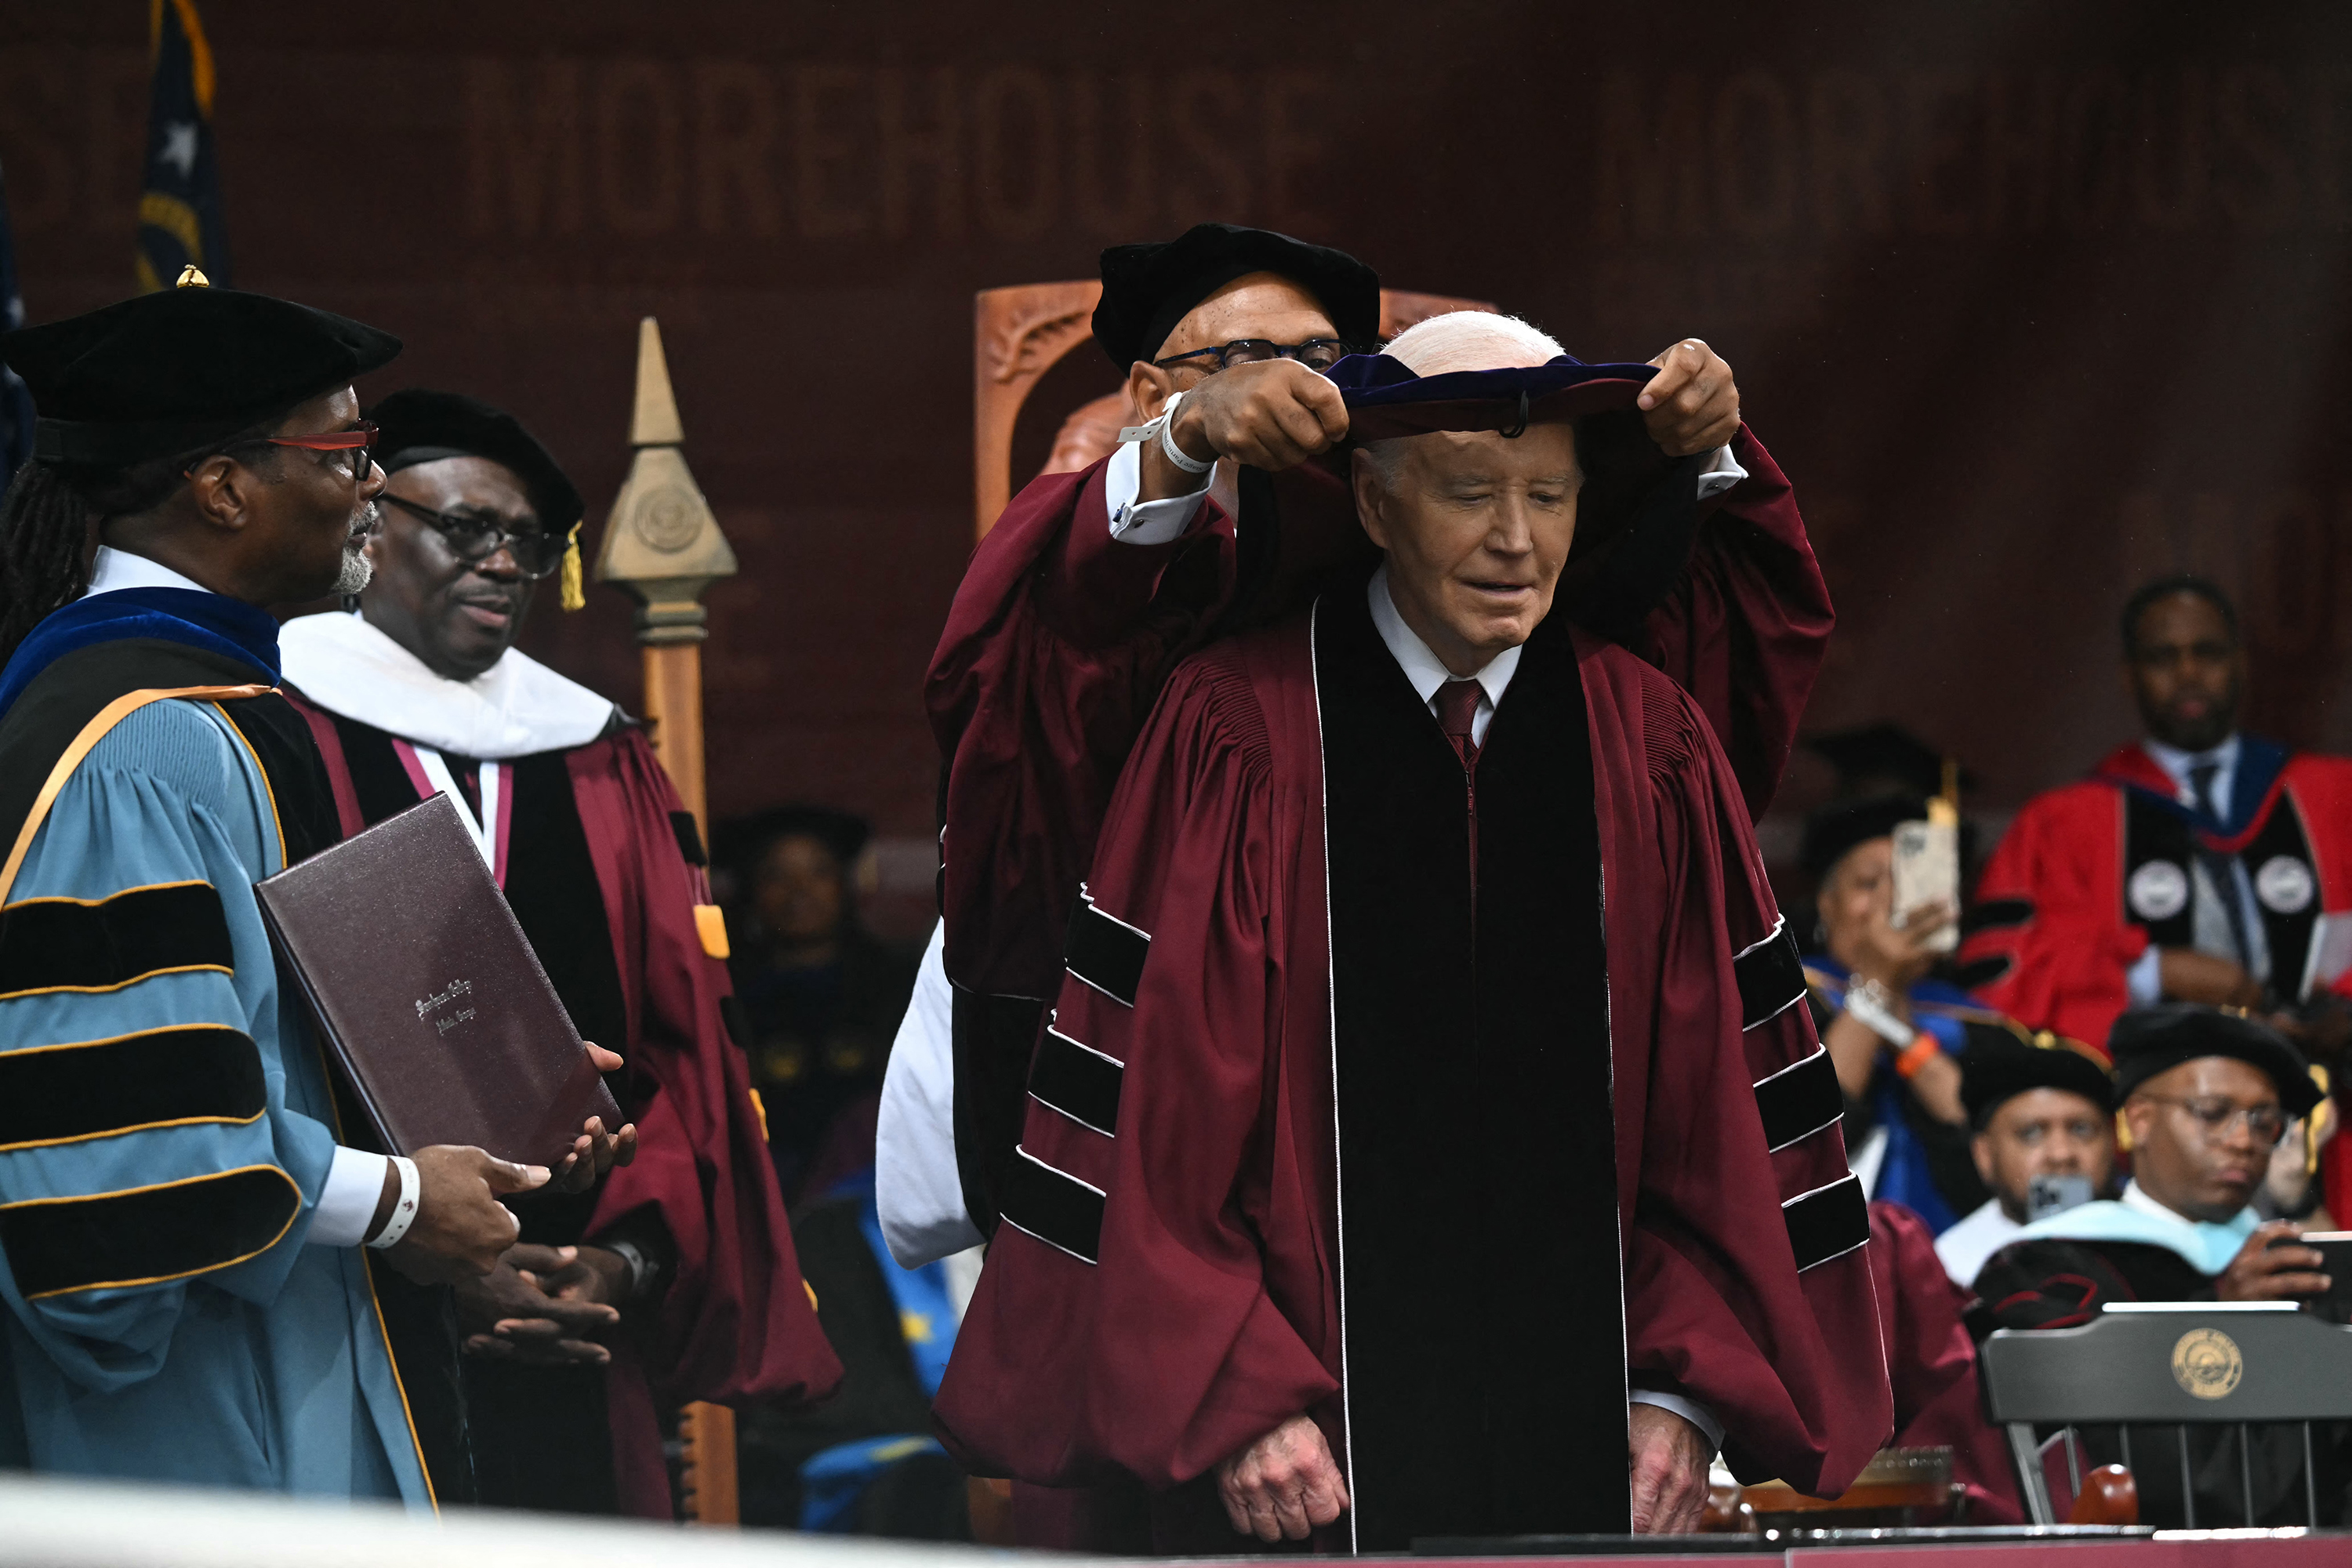 President Joe Biden is given an honorary degree after delivering his commencement address at Morehouse College in Atlanta on May 19.